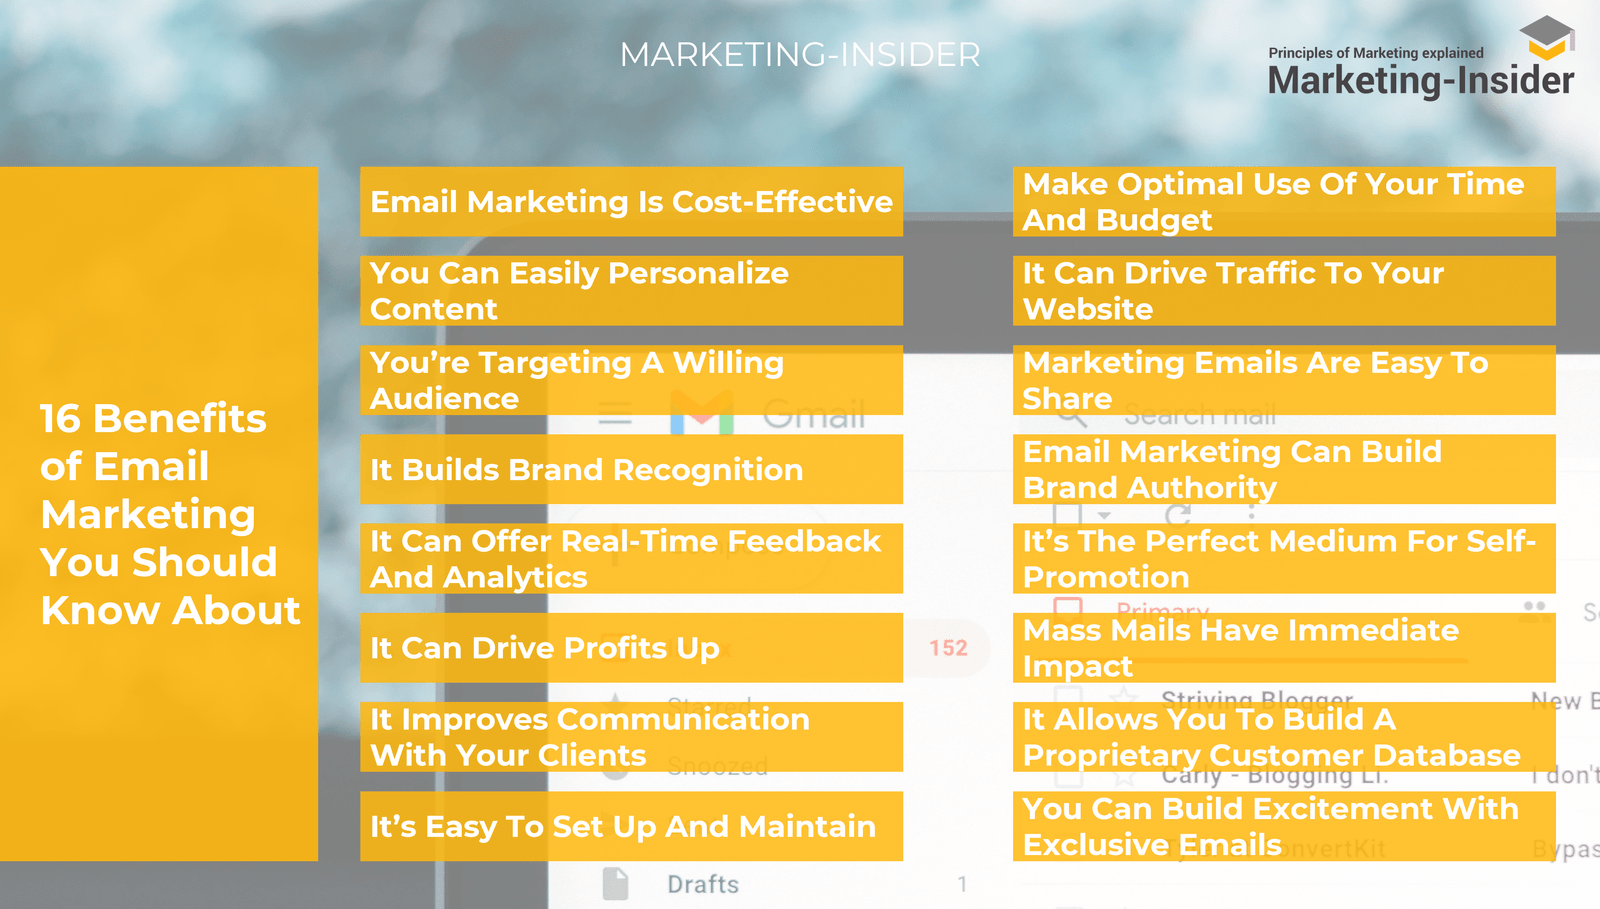 16 Benefits of Email Marketing You Should Know About